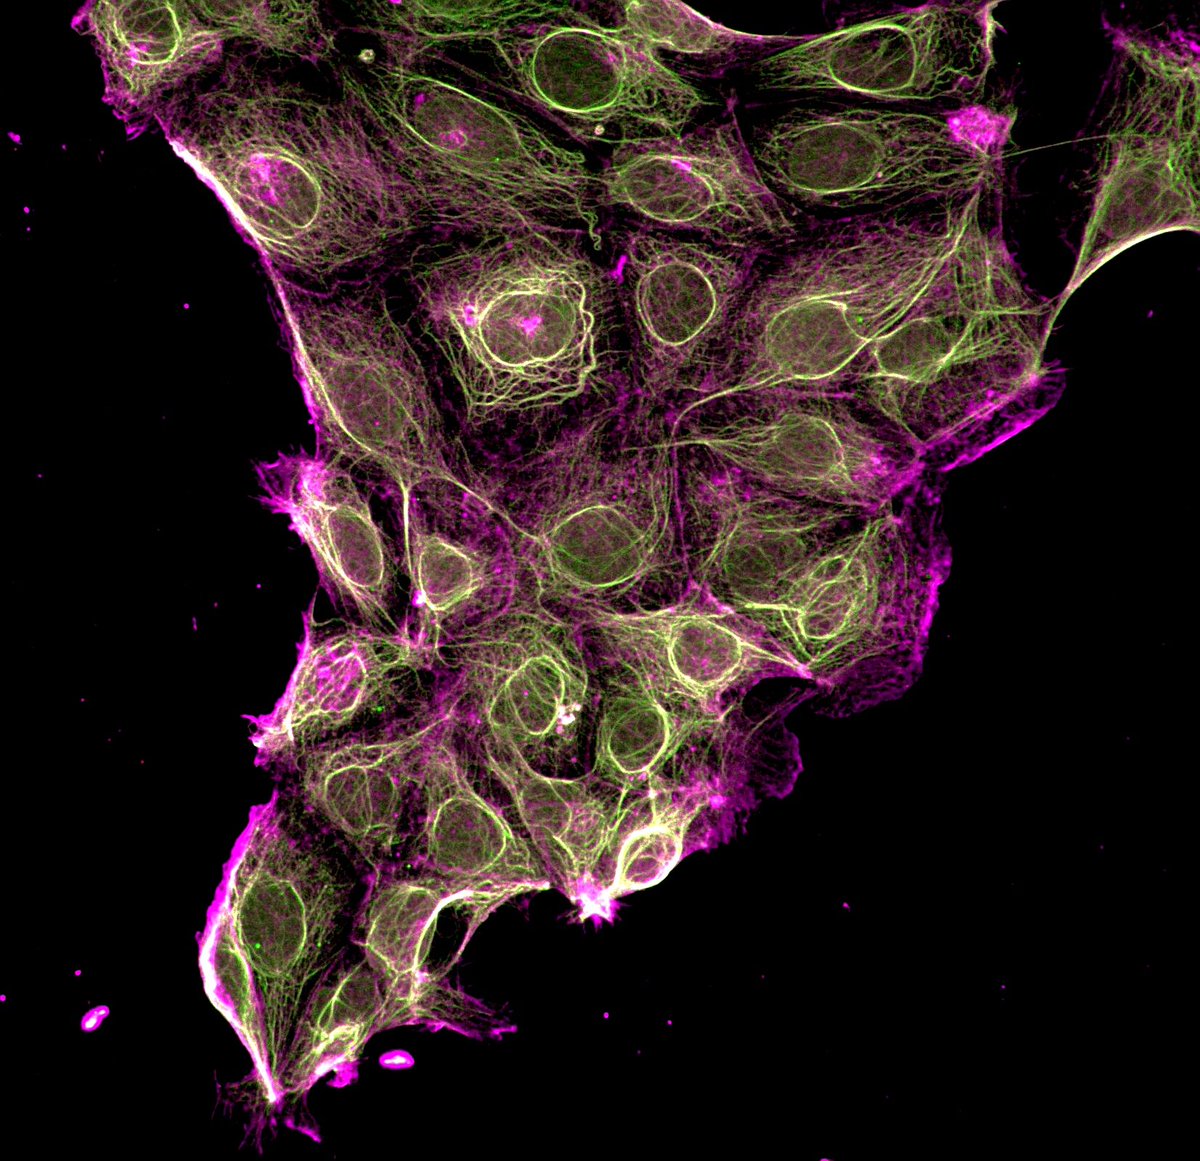 Failing an immunofluorescence assay can sometimes be both frustrating and fascinating... You get no data out of it, but you definitely get great wallpapers for your desktop 🤩
(microtubules or actin, I don't know - but the signal definitely shouldn't be there! )